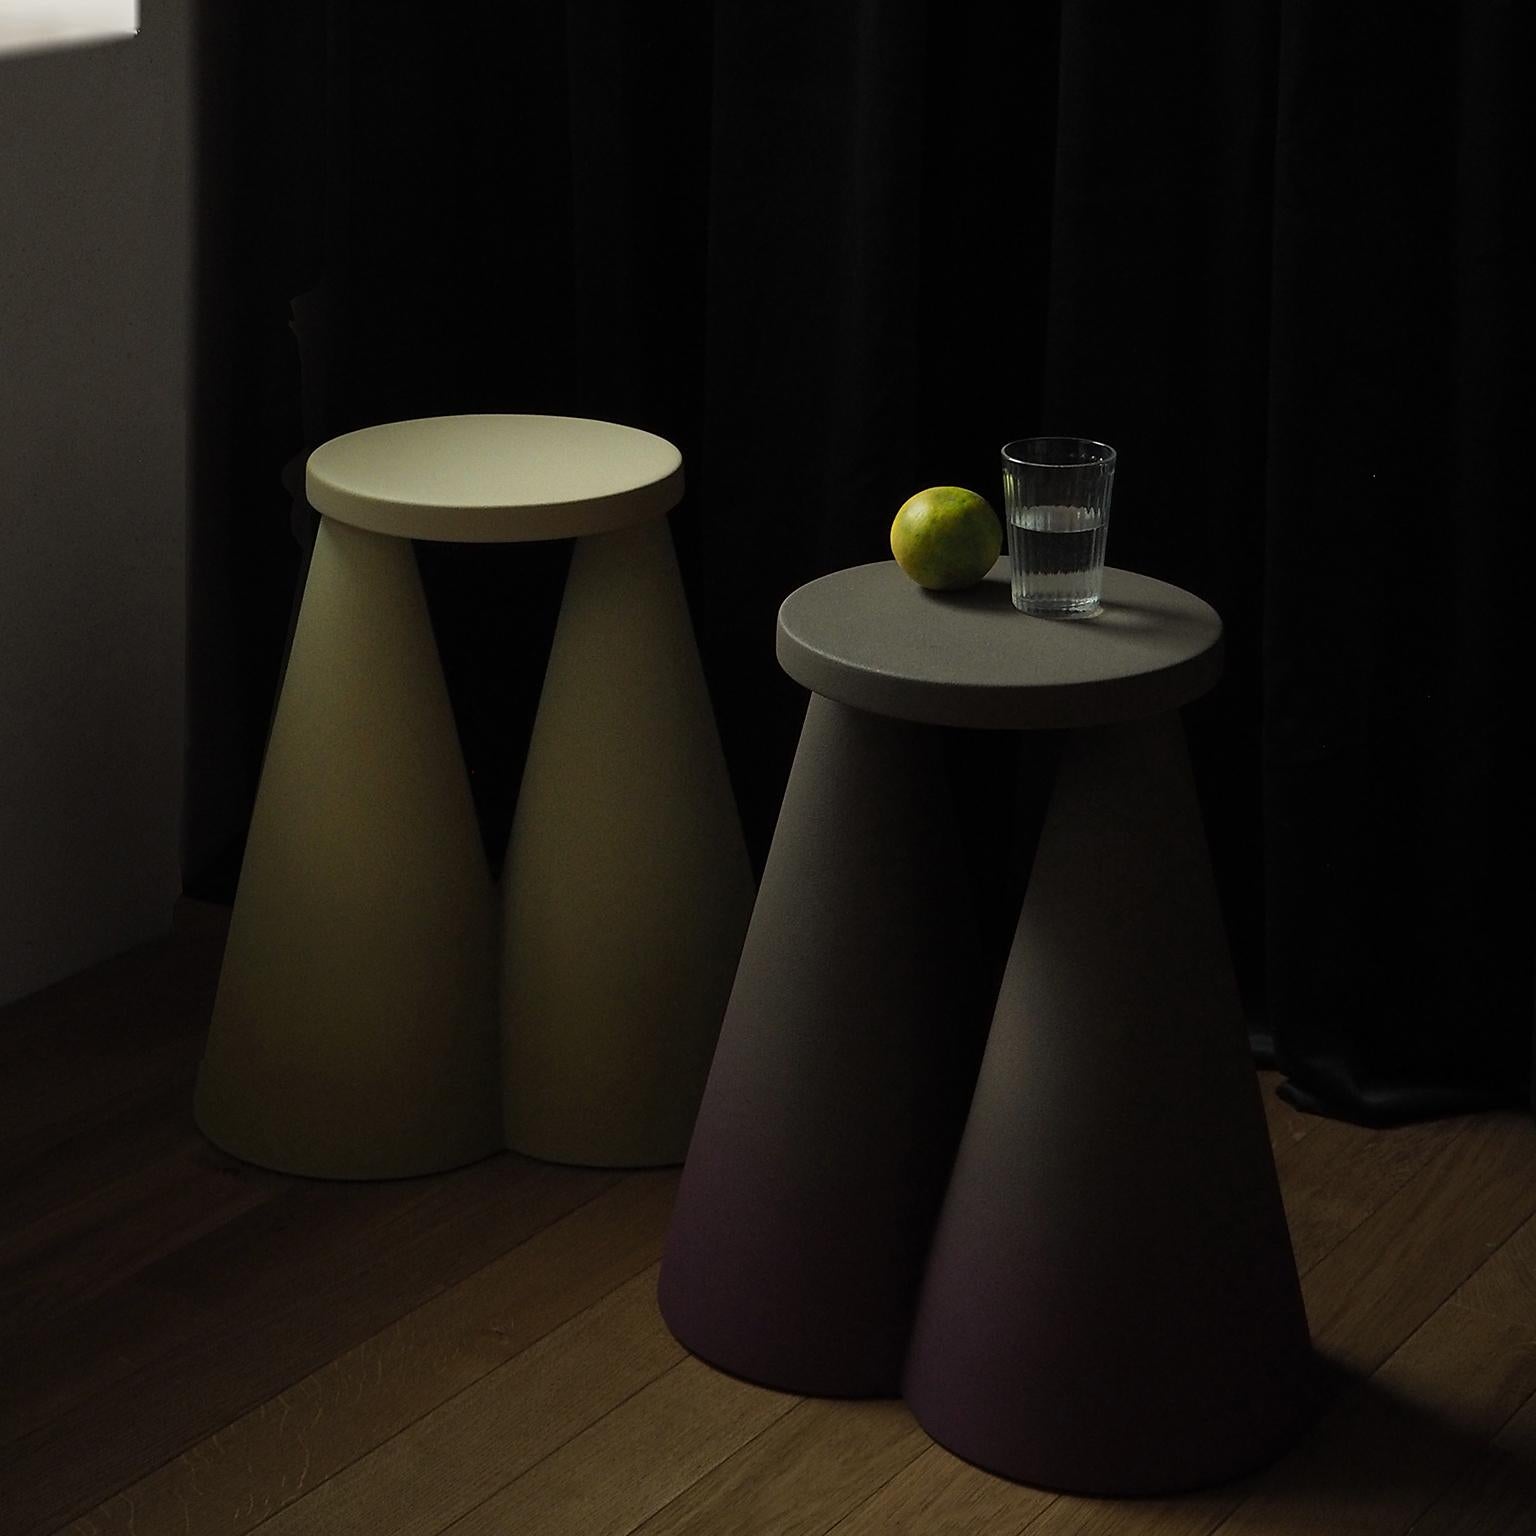 Isola side table is completely made in ceramic using high temperature furnace, to make the material stronger.

The large base makes the object stable as well as unique on its design.

Each piece is then finished by playing with the contrast